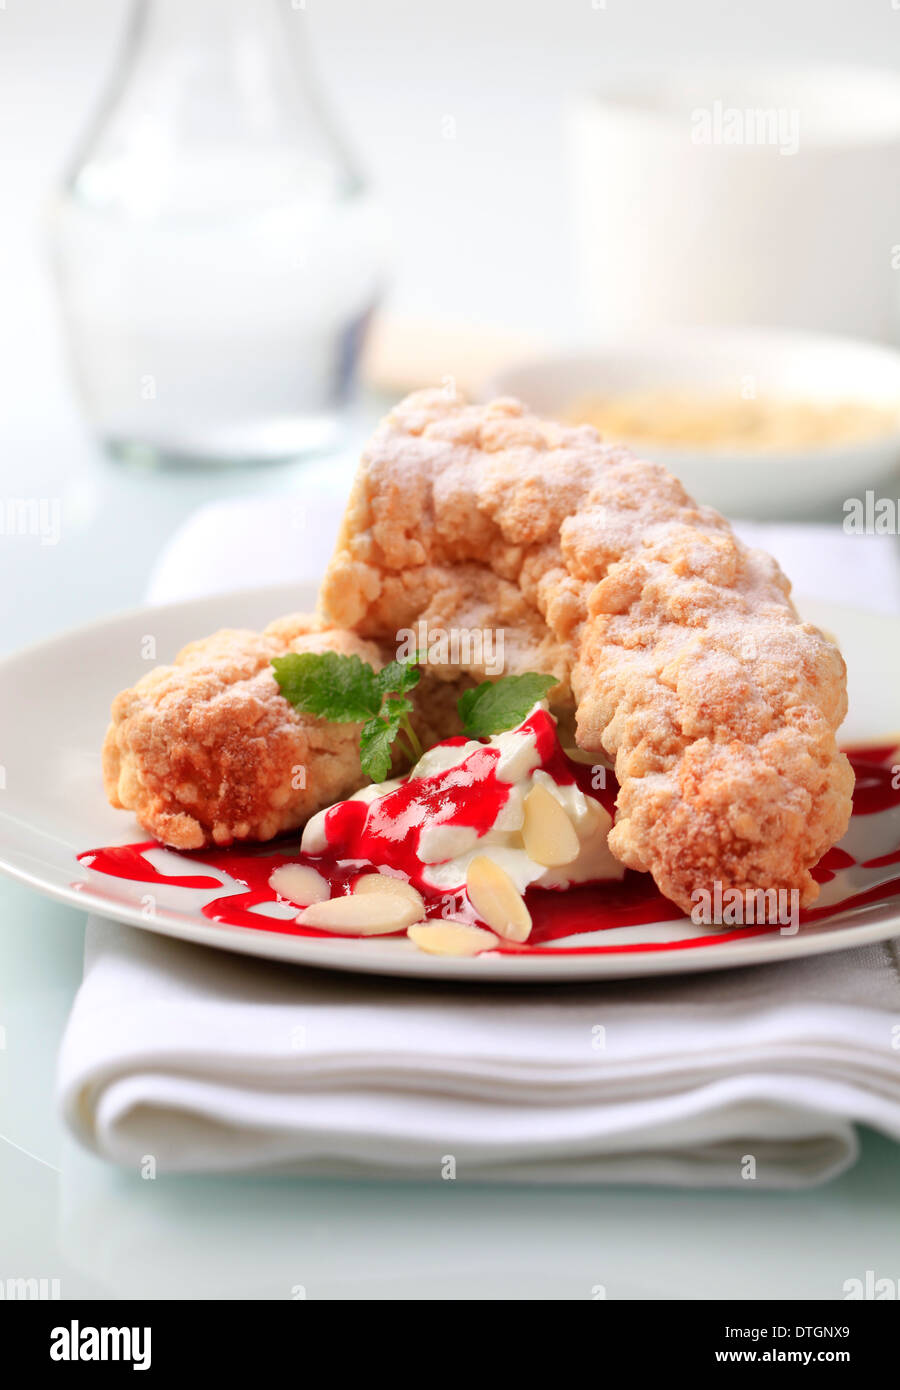 Sweet bread rolls with cream cheese and syrup Stock Photo